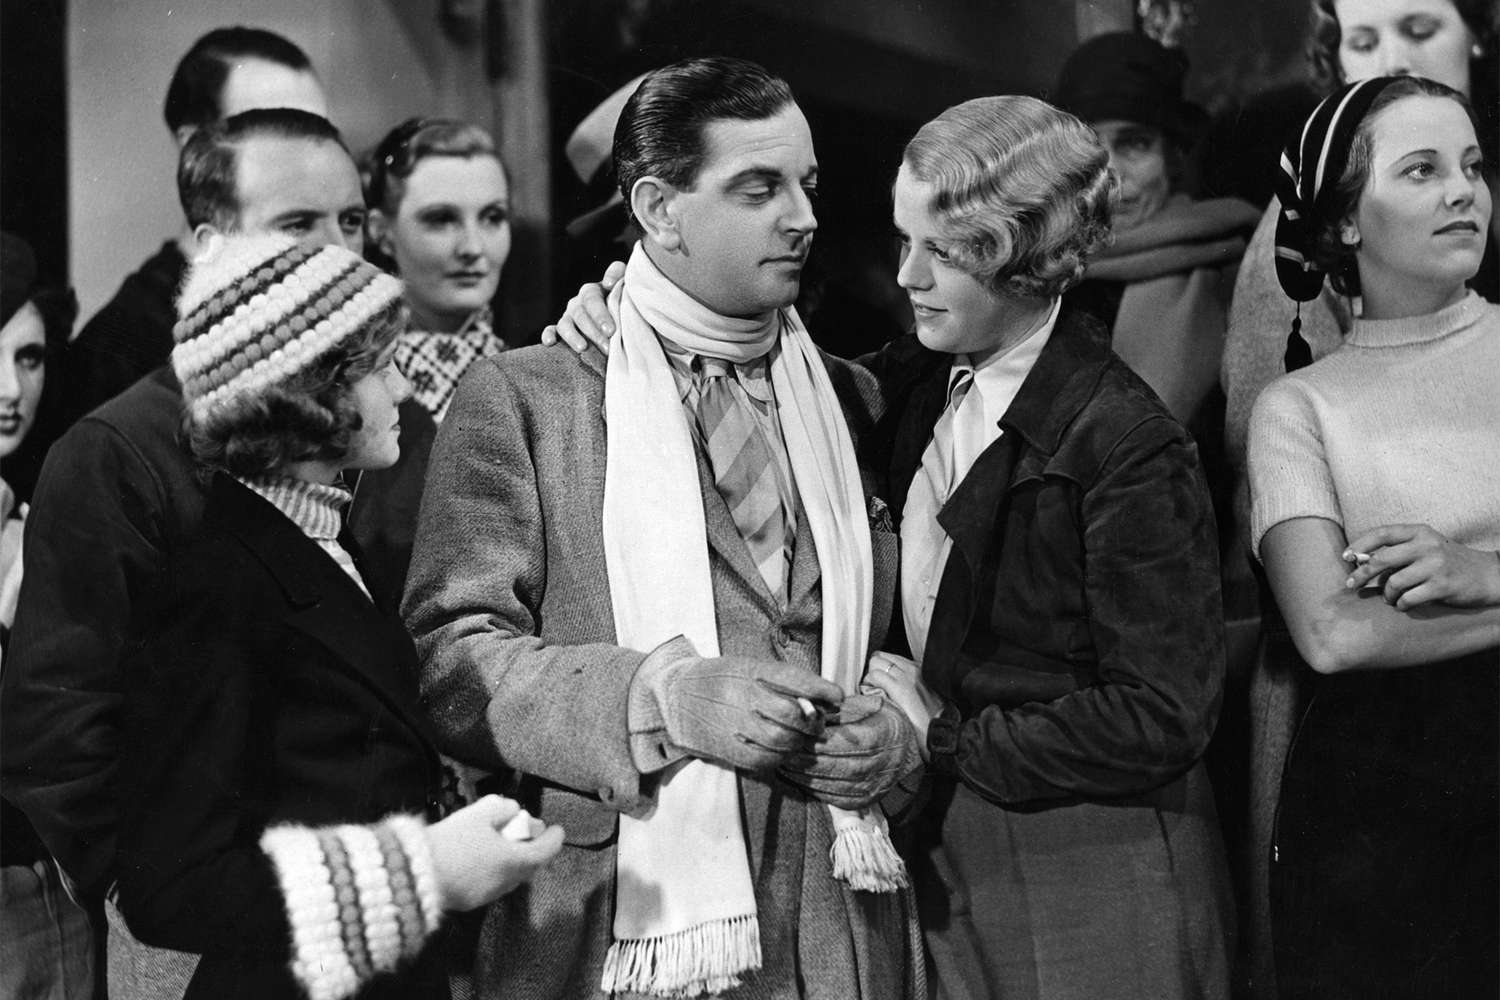 1934: Nova Pilbeam, Leslie Banks (1890-1952) and Edna Best (1900-1974) in a scene from the spy thriller 'The Man Who Knew Too Much', directed by Alfred Hitchcock for Gaumont. (Photo by Hulton Archive/Getty Images)